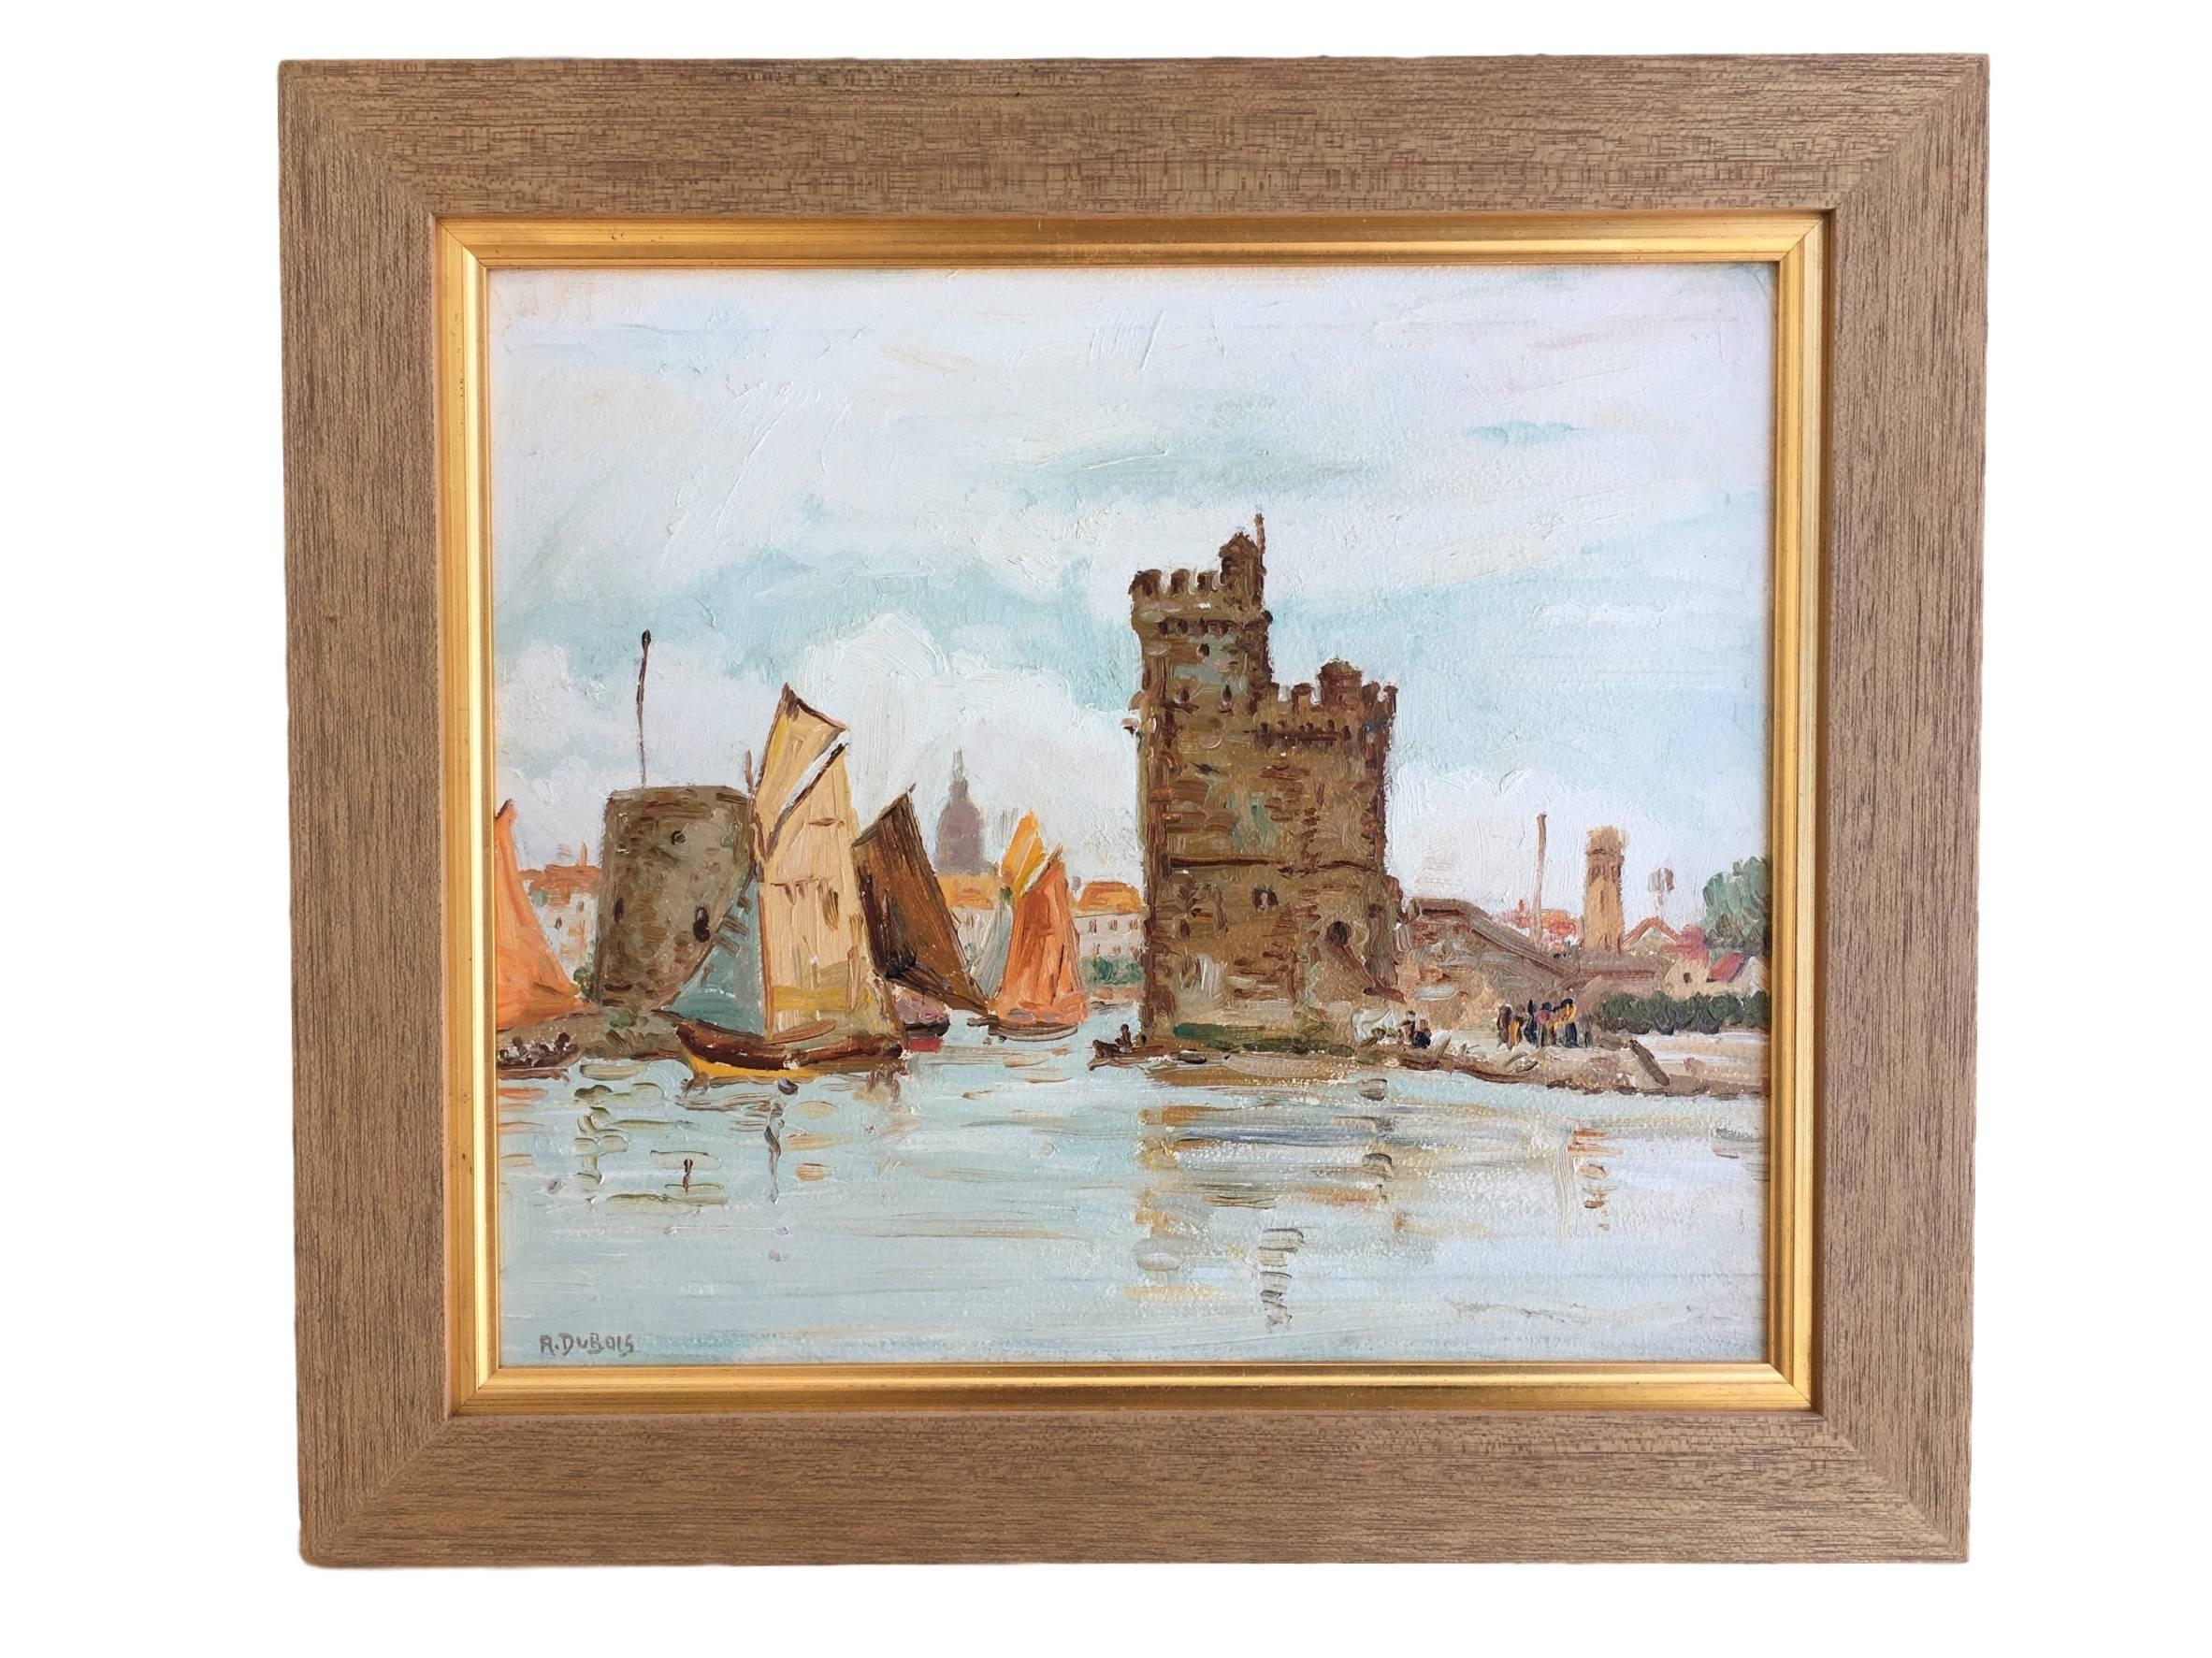 Paint ‘The Port of La Rochelle’, Oil on Board, Signed Dubois, France, circa 1935